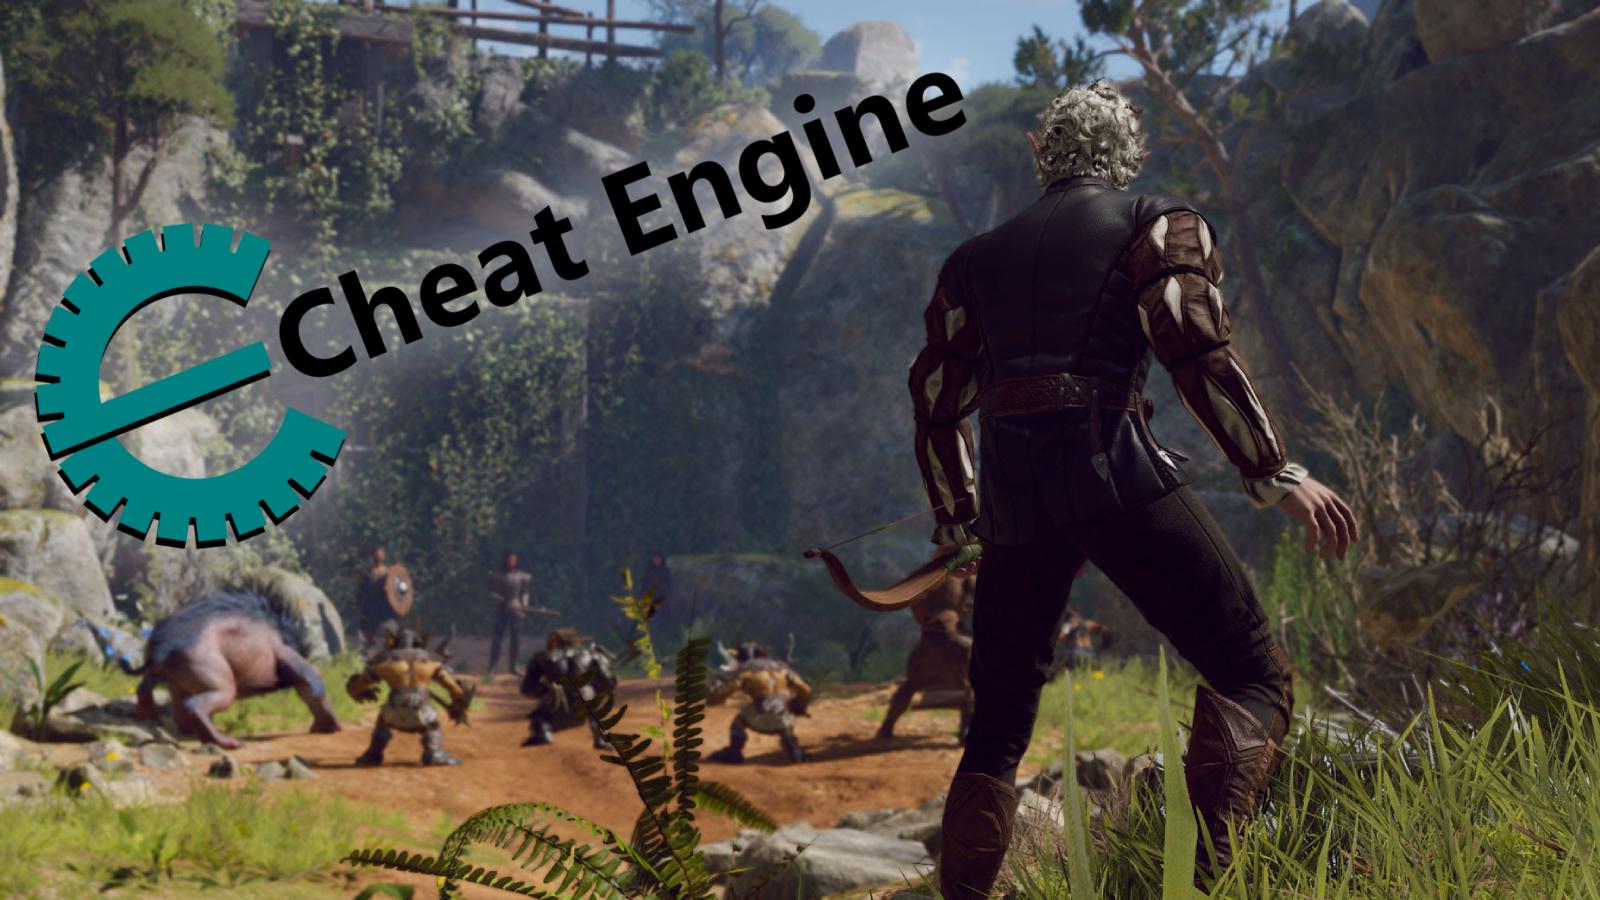 Cheat engine/Cheat table users) There is realistic hidden